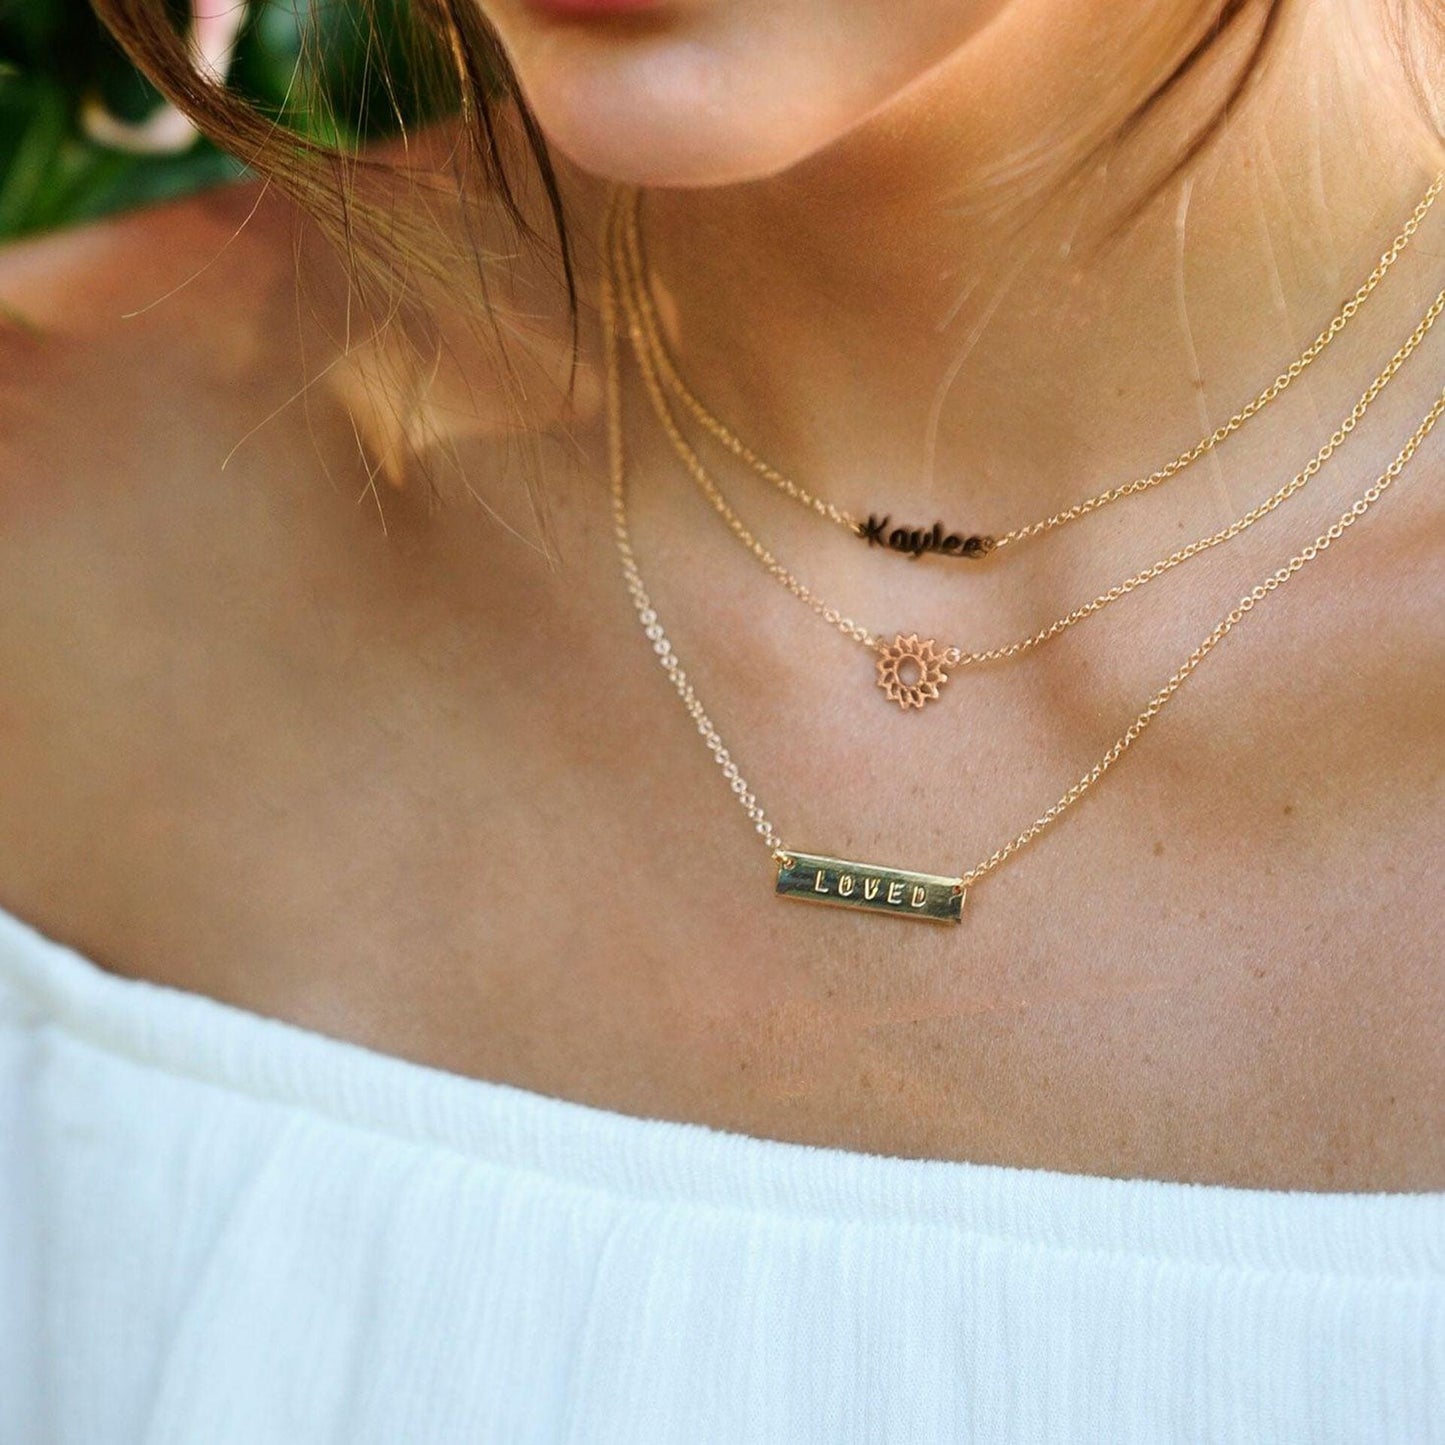 Lumiela Personalized Nameplate Katie Necklace in Gold Tone